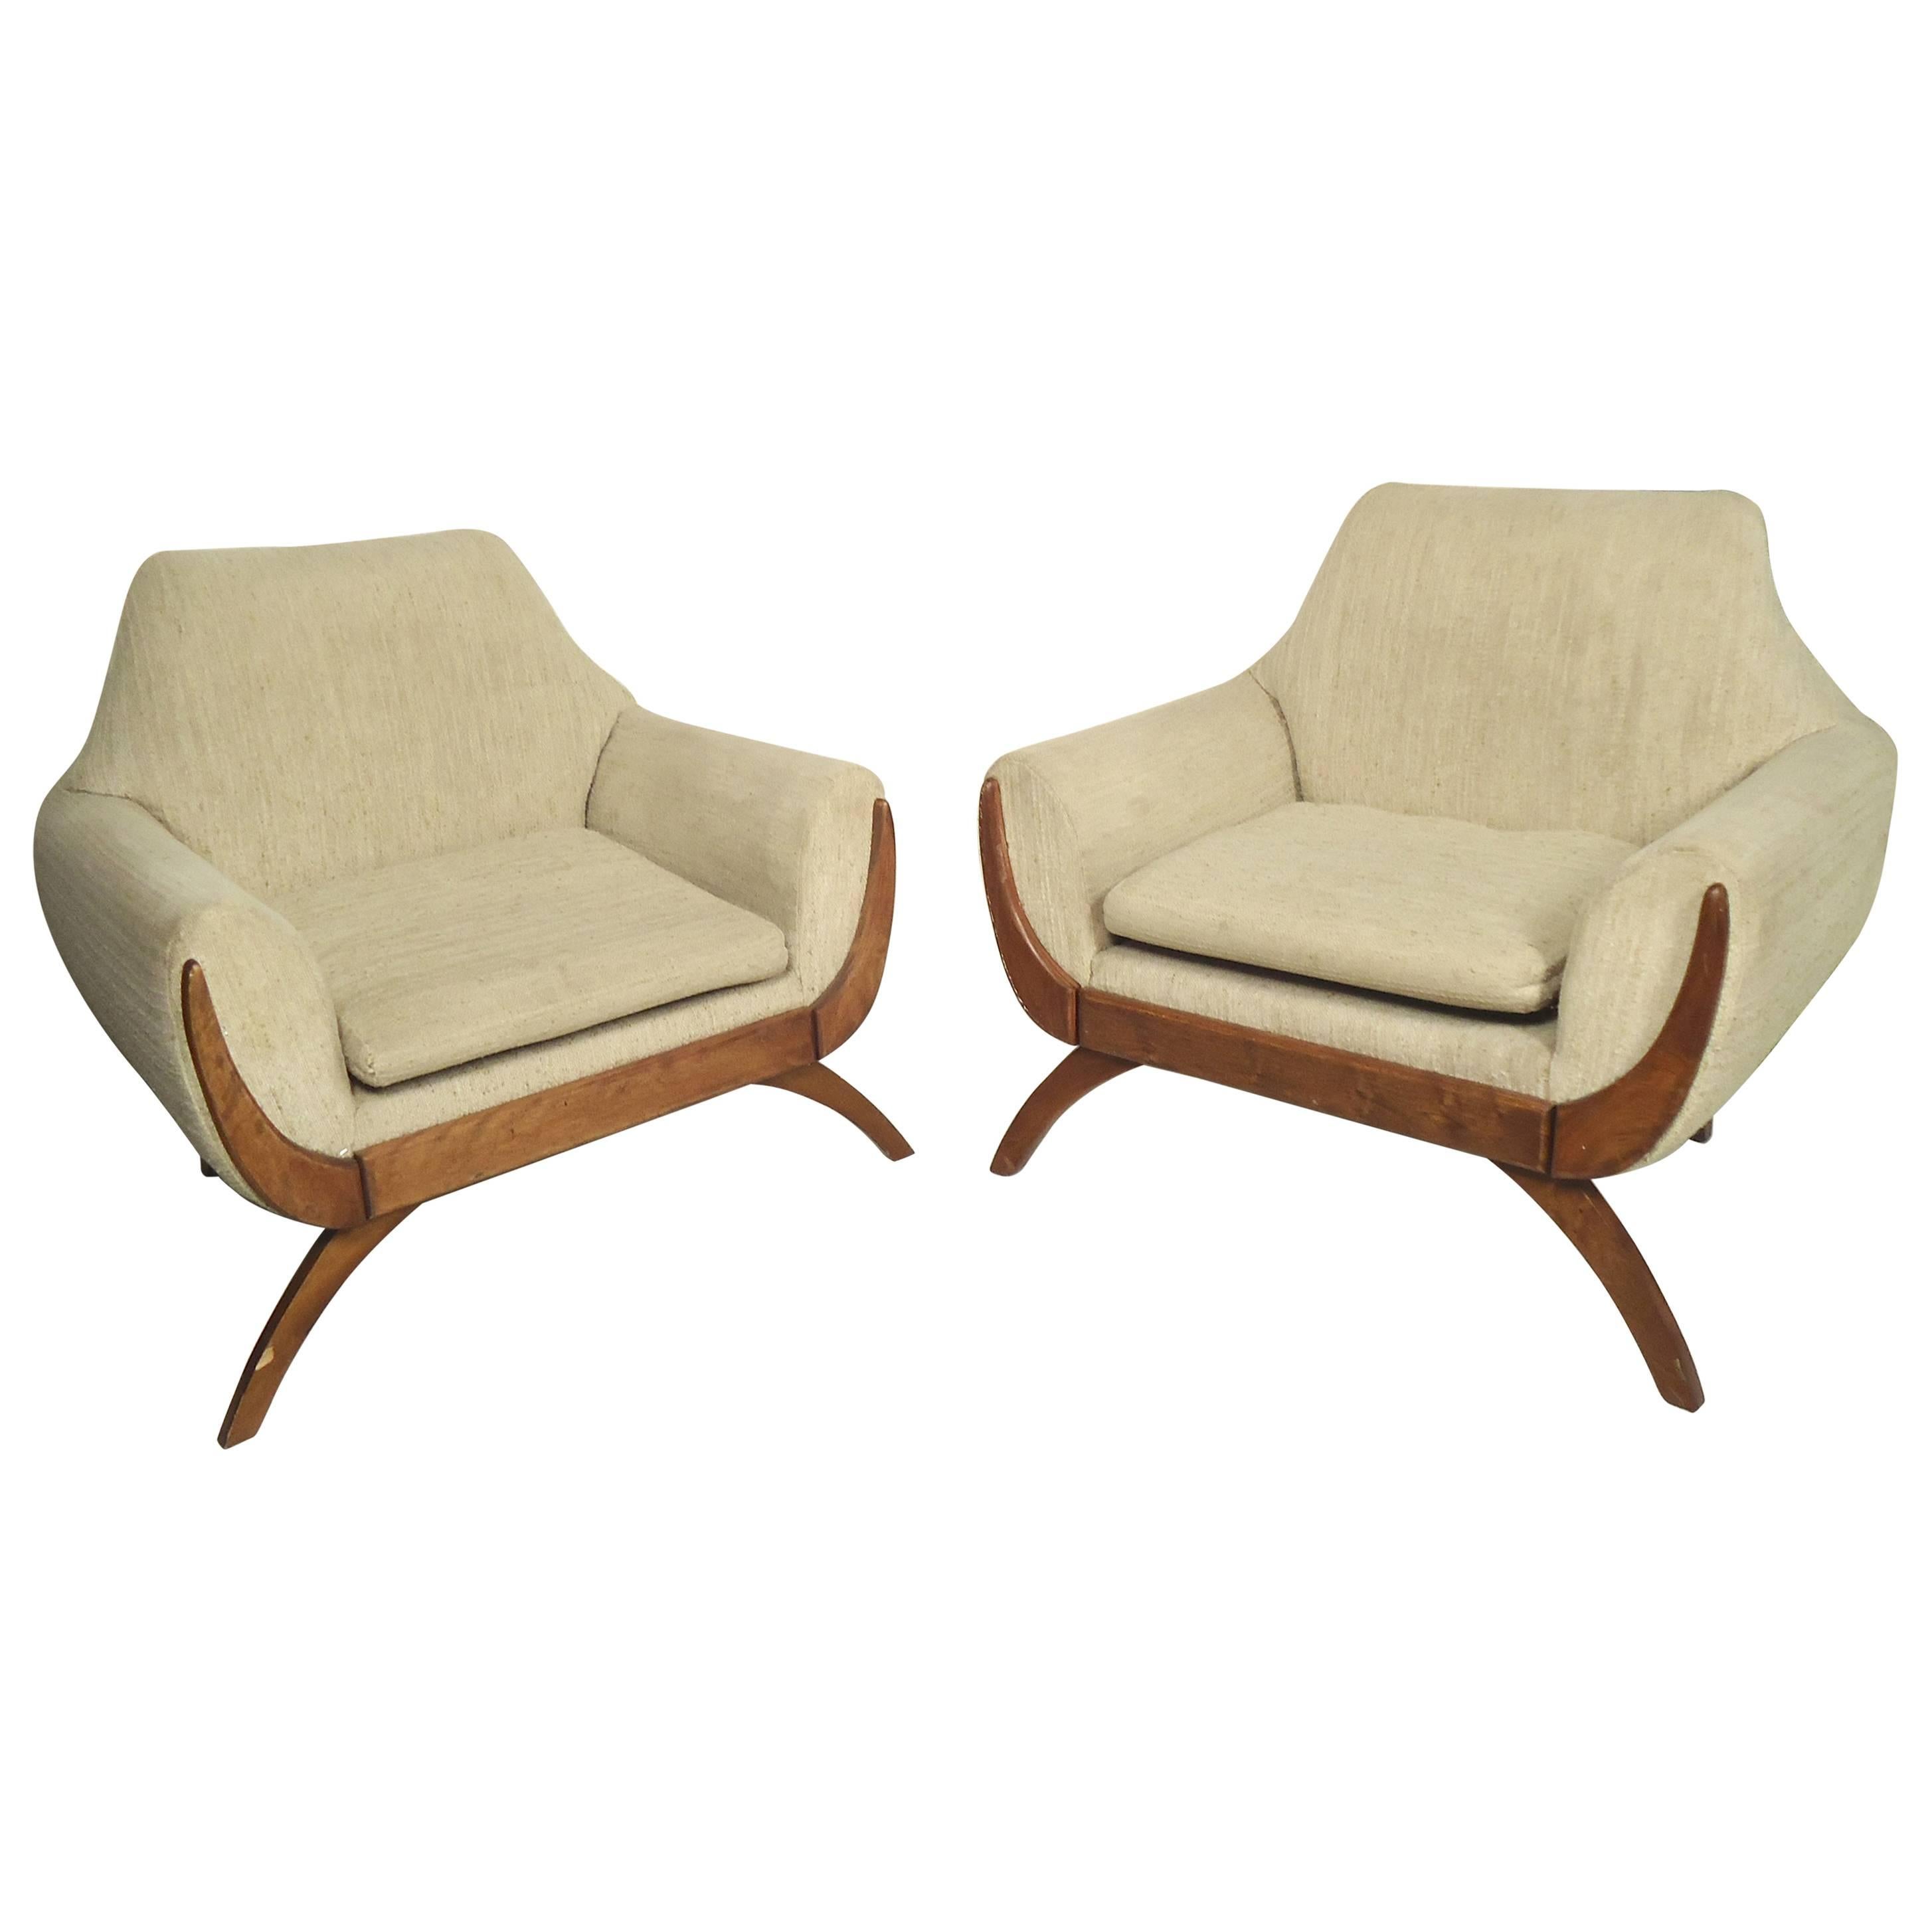 Mid-Century Modern Adrian Pearsall Chairs